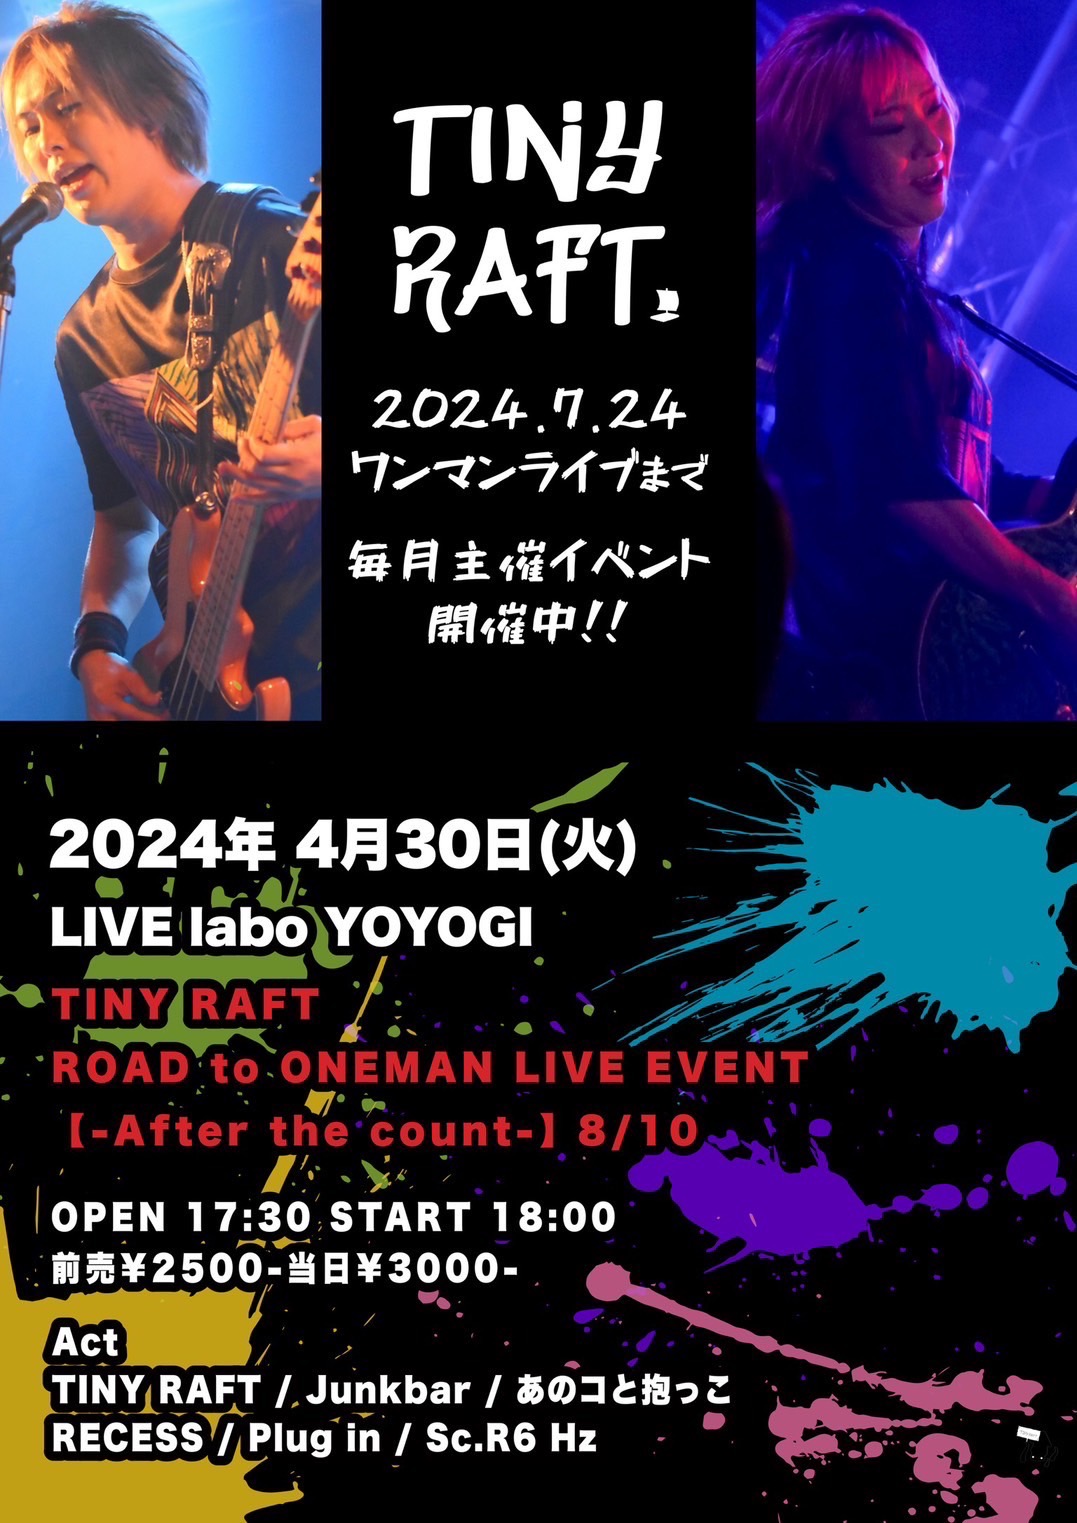 TINY RAFT ROAD TO ONEMAN LIVE EVENT
【After the count】8/10